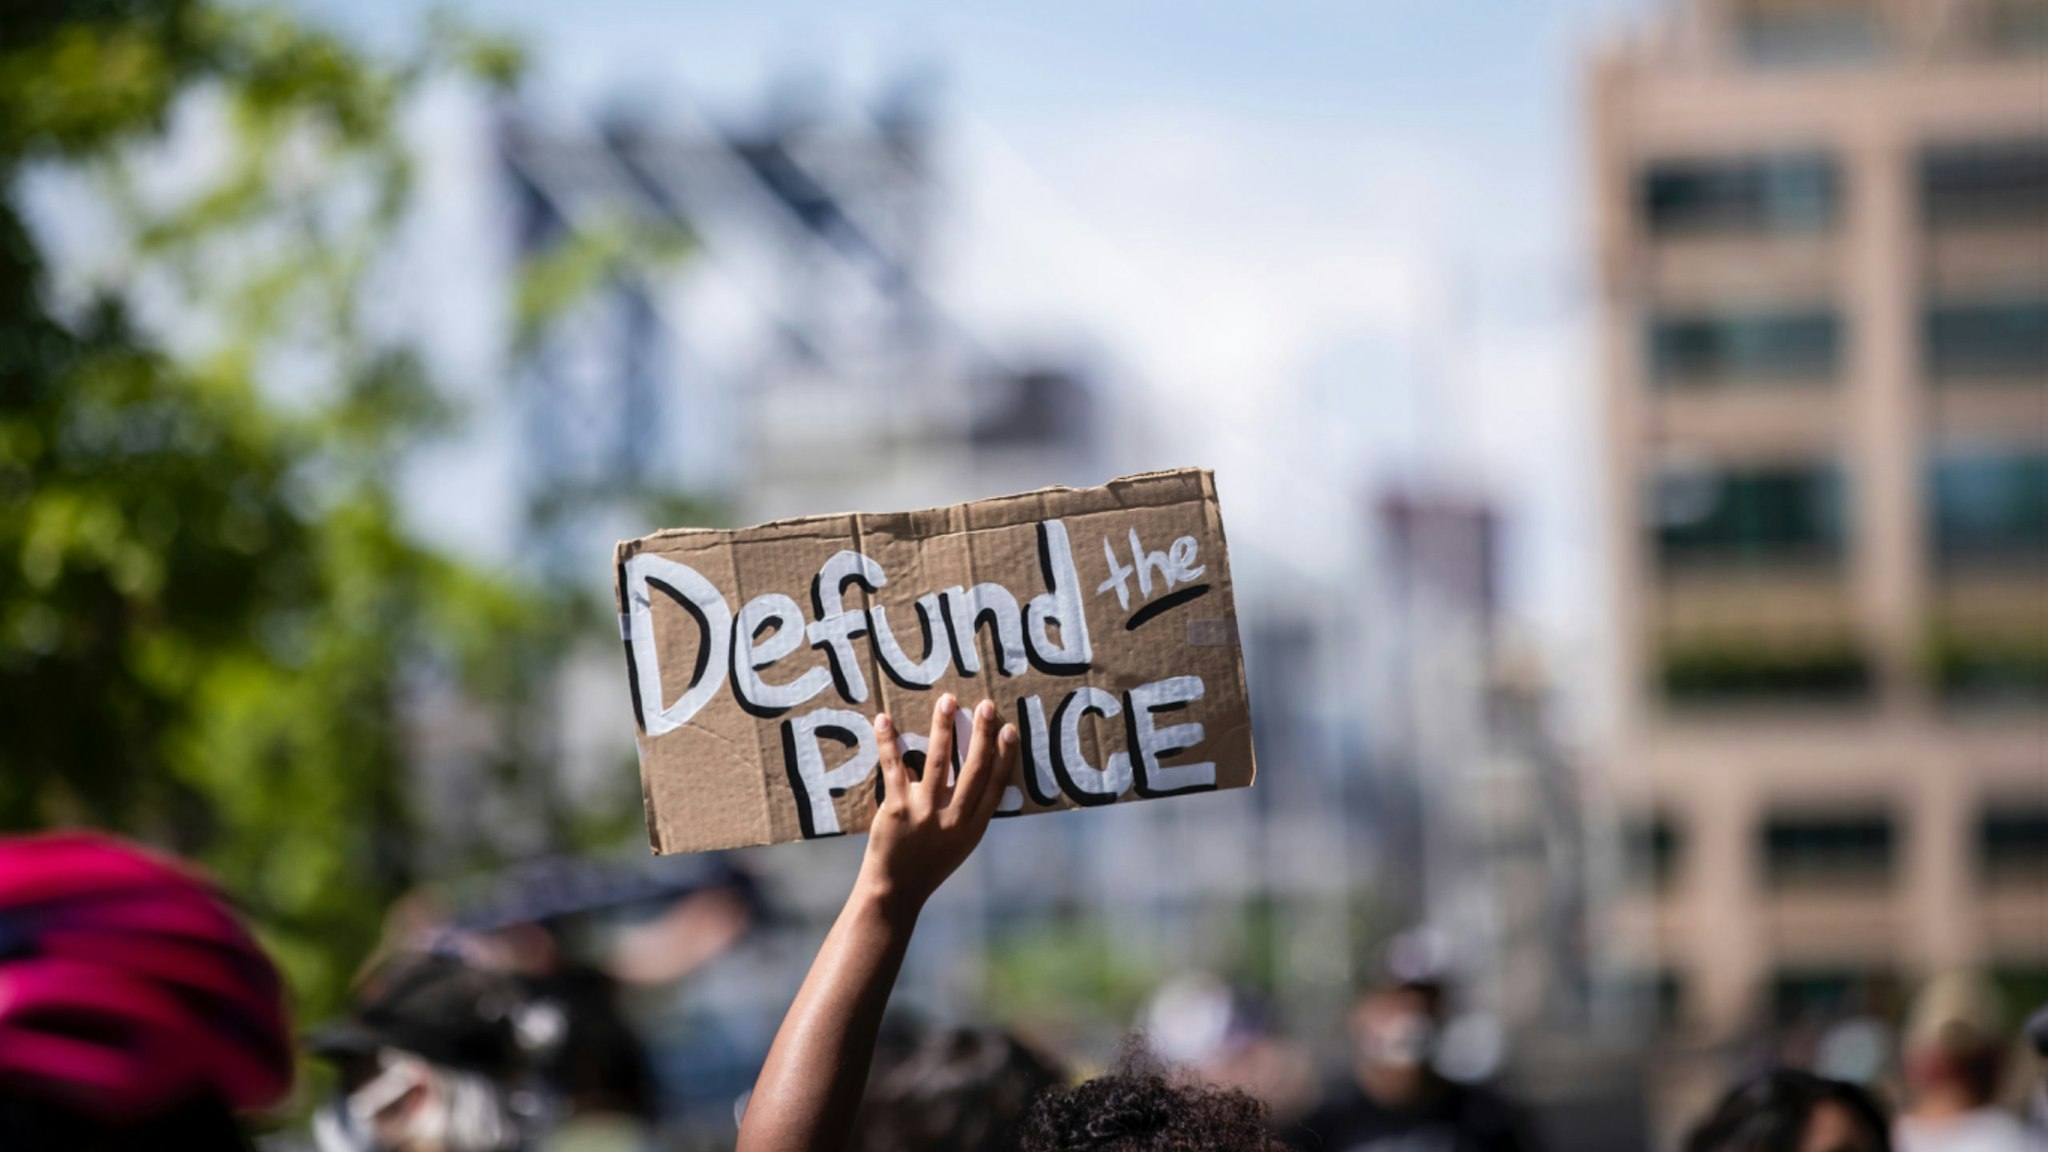 MANHATTAN, NY - JUNE 19: A protester holds up a homemade sign that says, "Defund the Police" with the Manhattan Bridge behind them as they perform a peaceful protest walk across the Brooklyn Bridge.